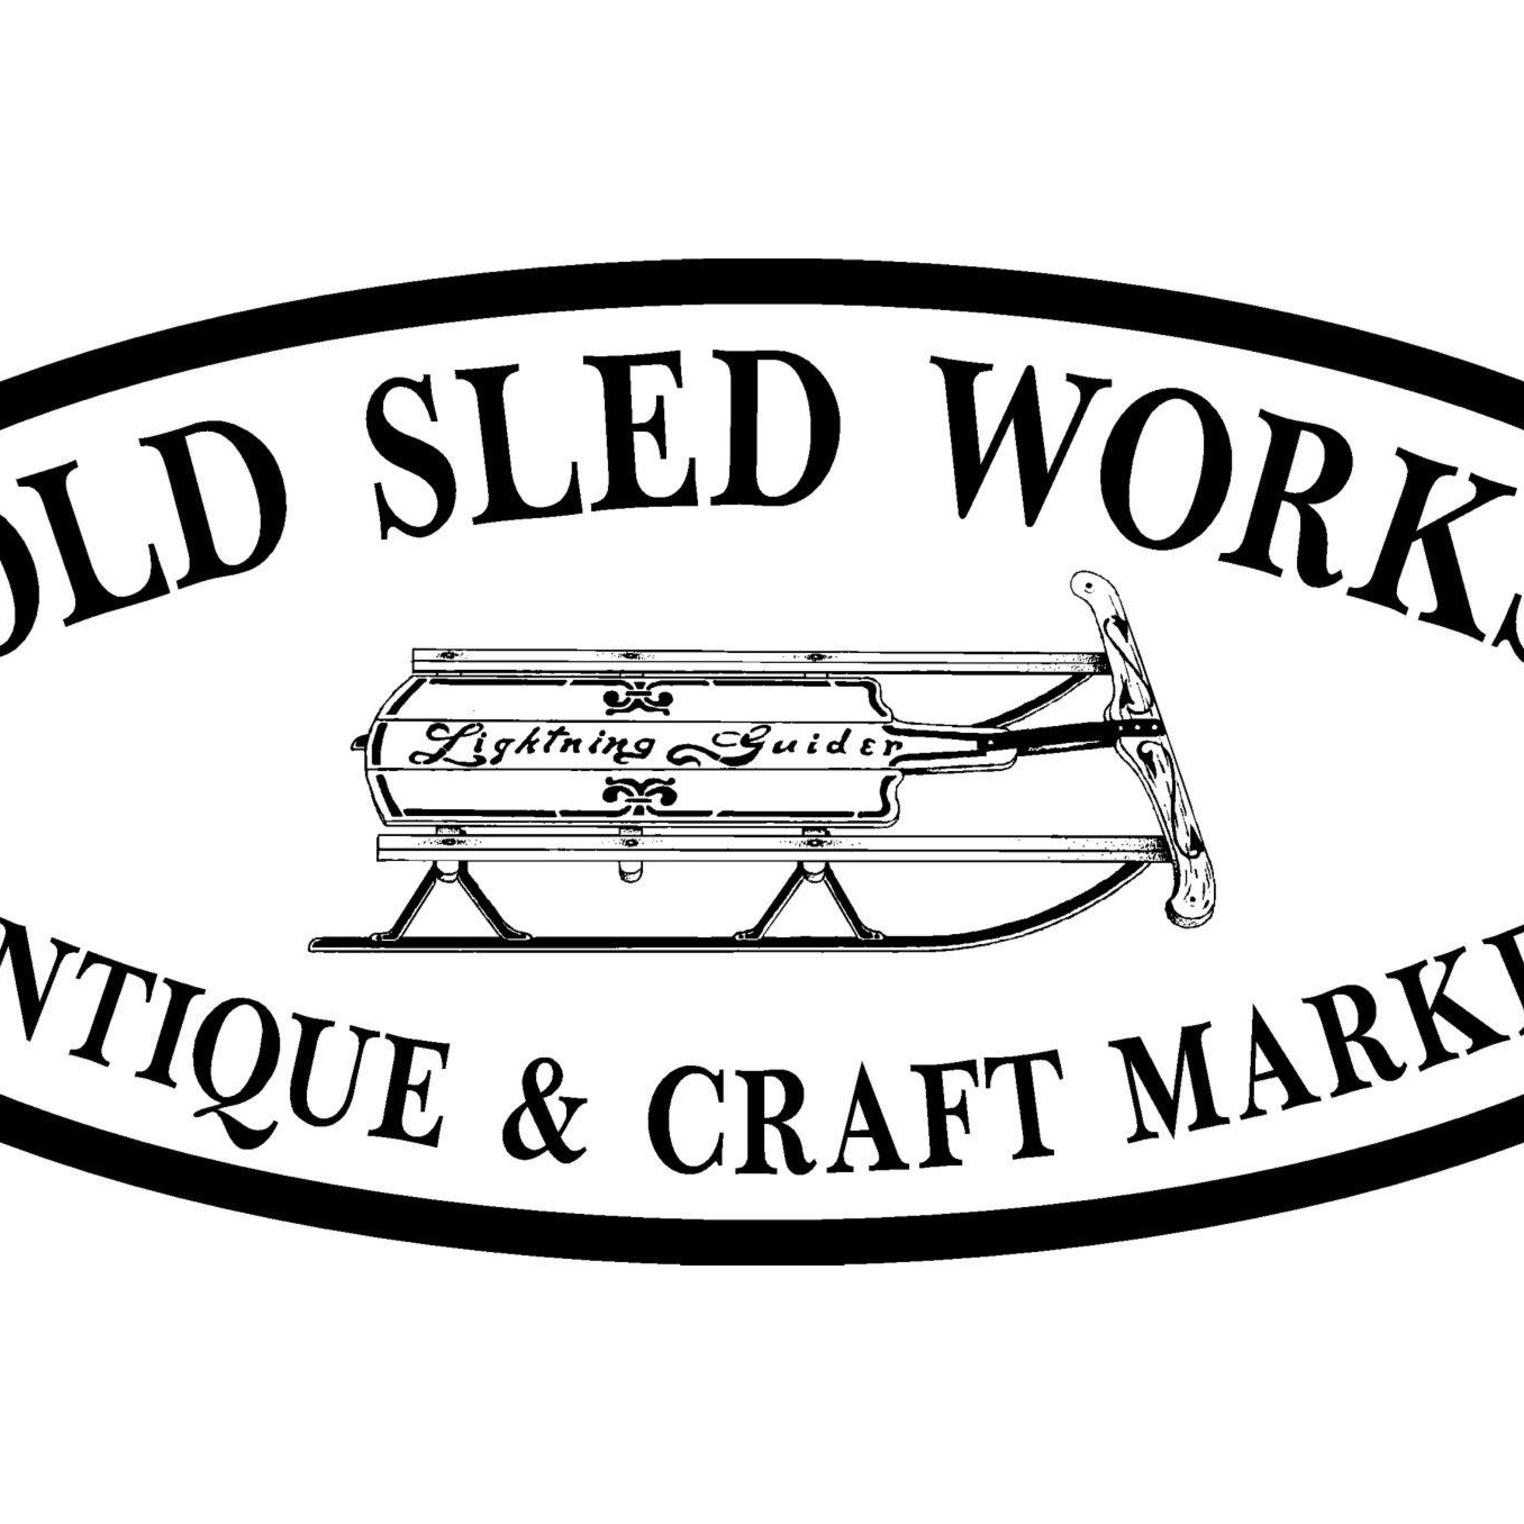 Old Sled Works Antiques and Craft Market